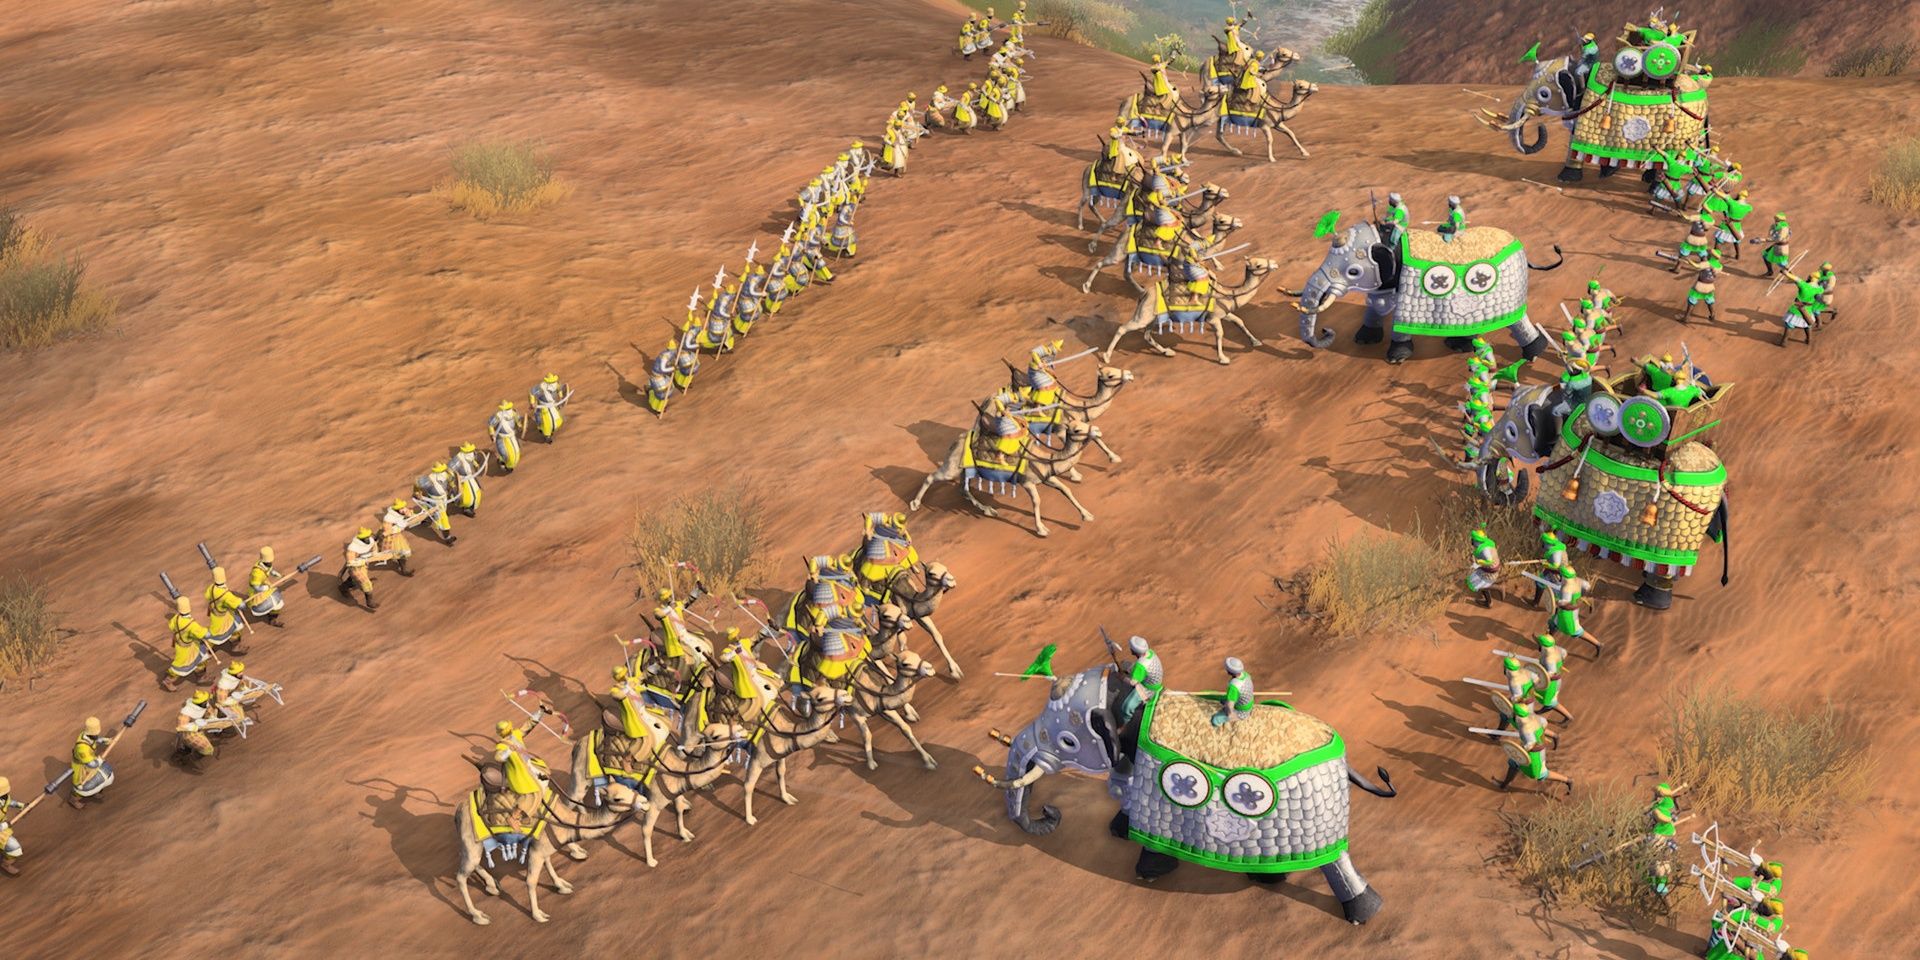 A battle with the green side using elephants in Age of Empires